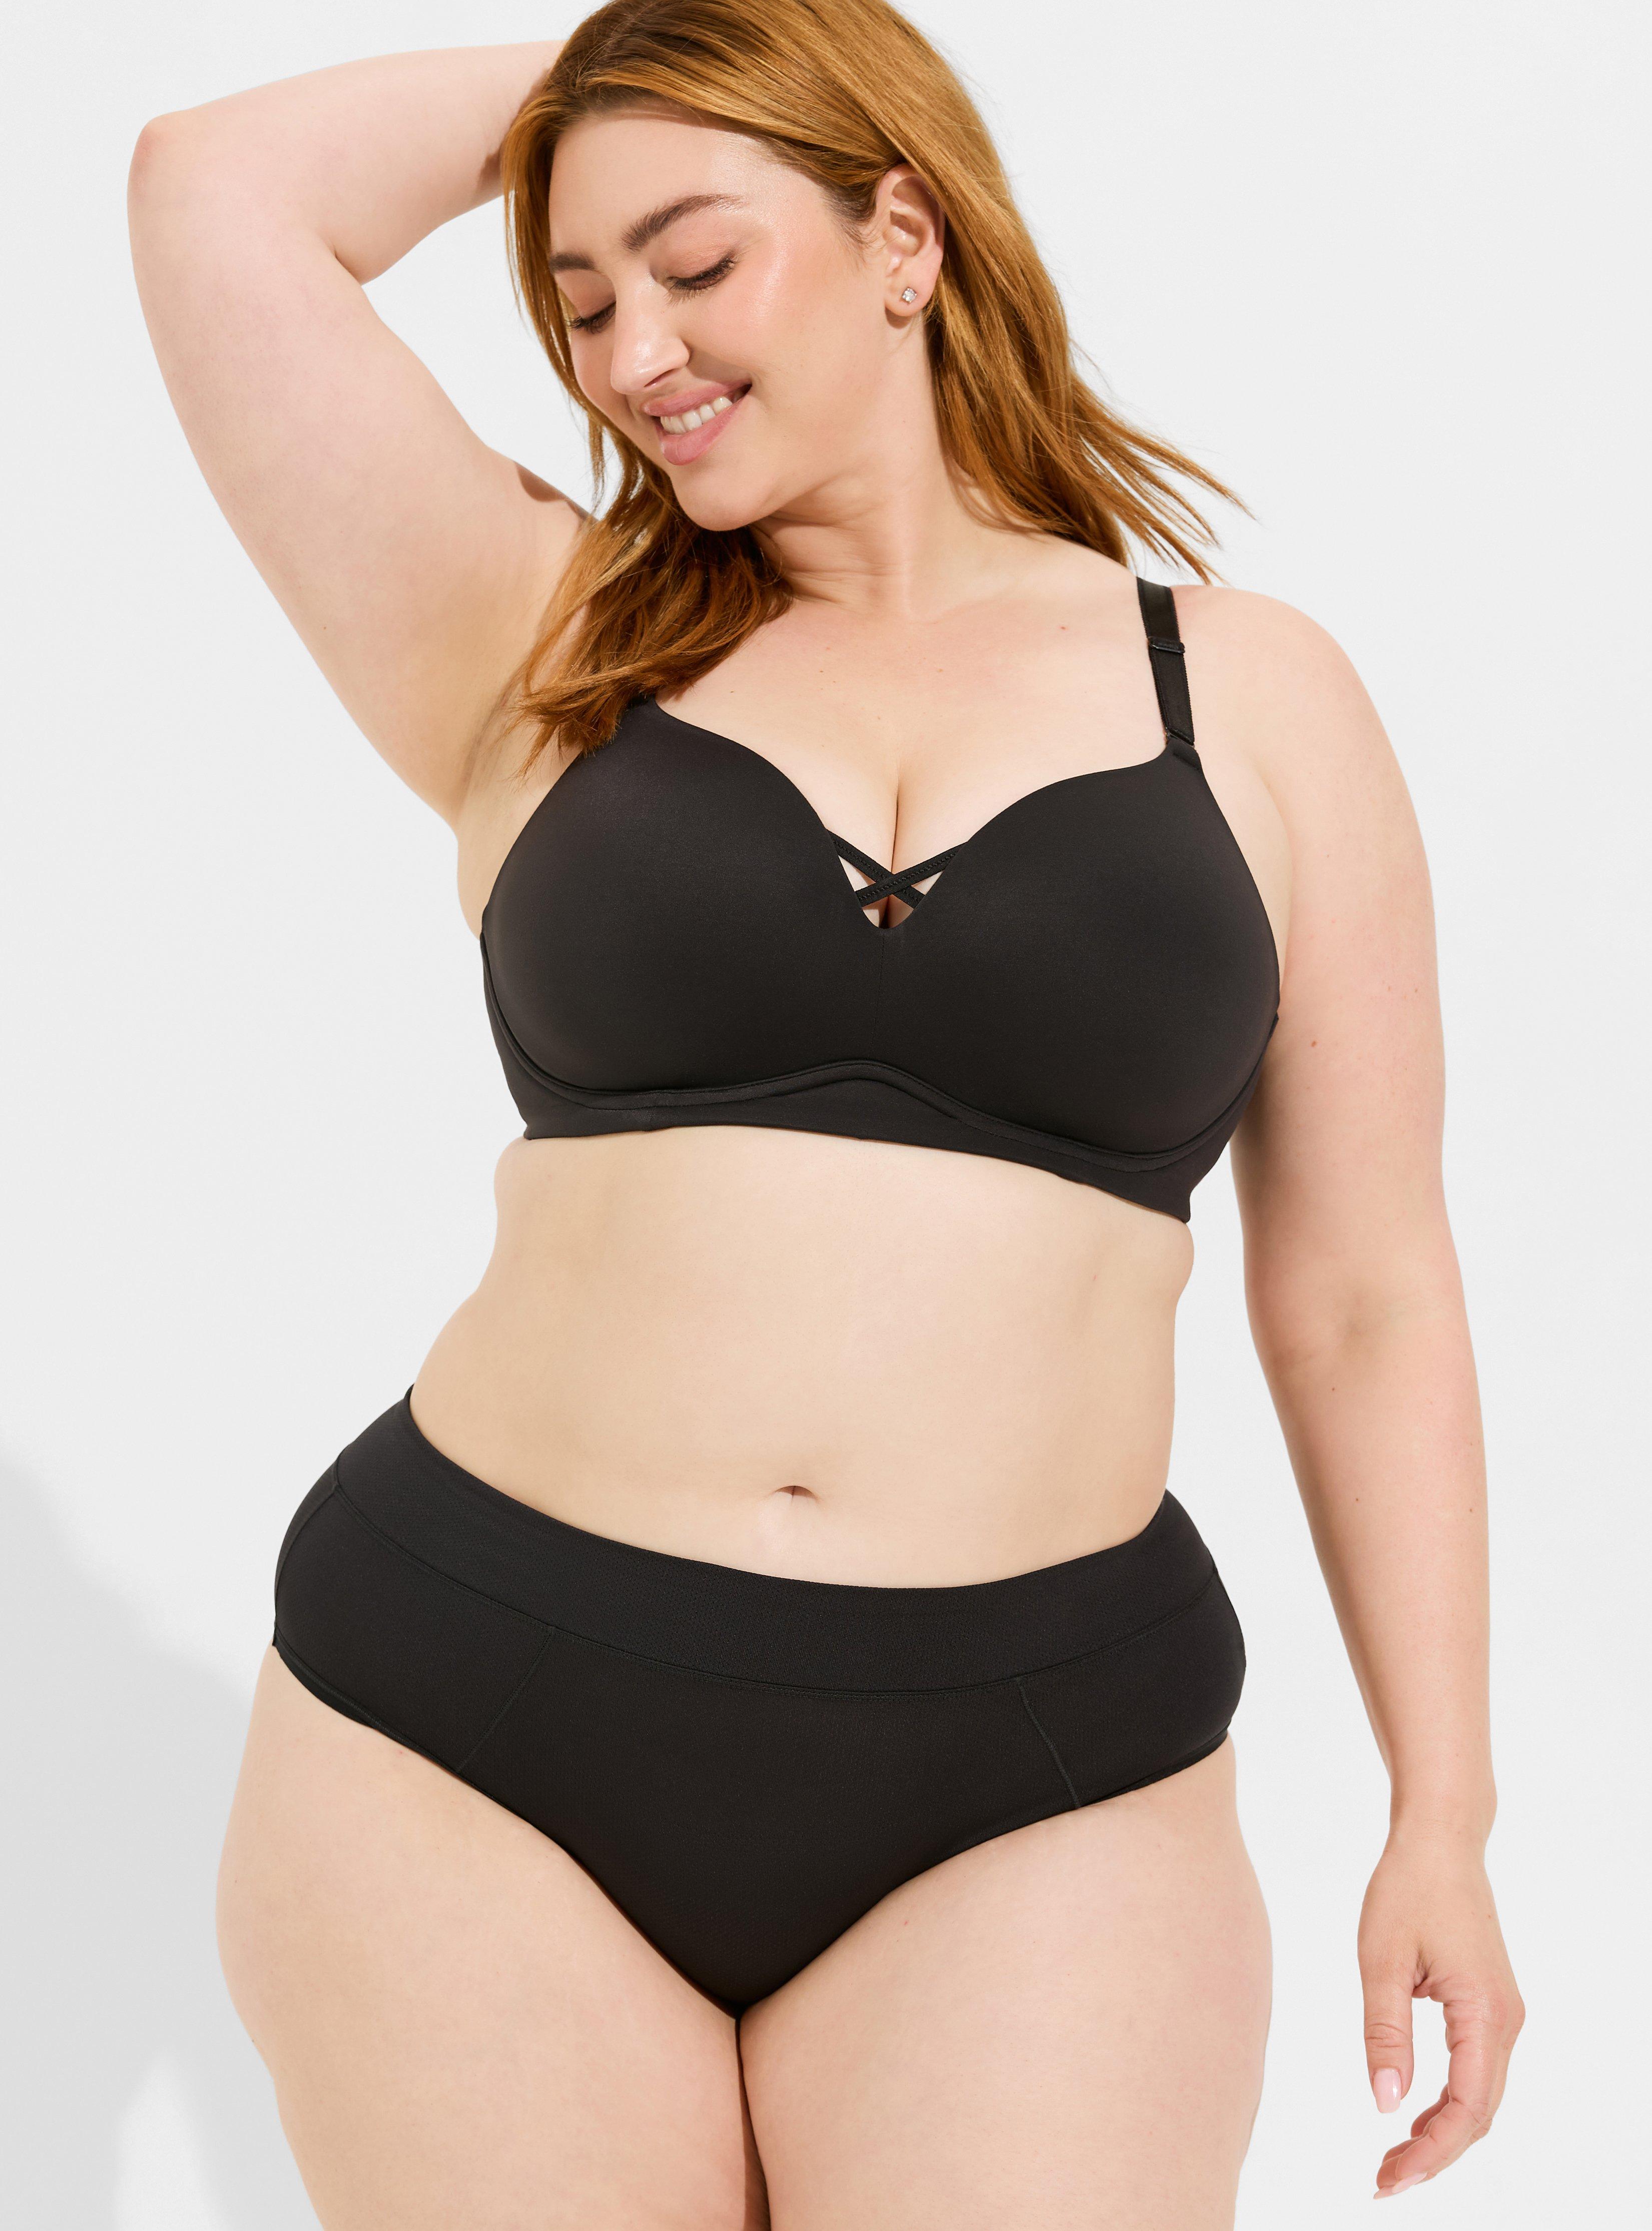 Wholesale Shapewear to take your Look to the Next Level - Family Blogger  Indonesia